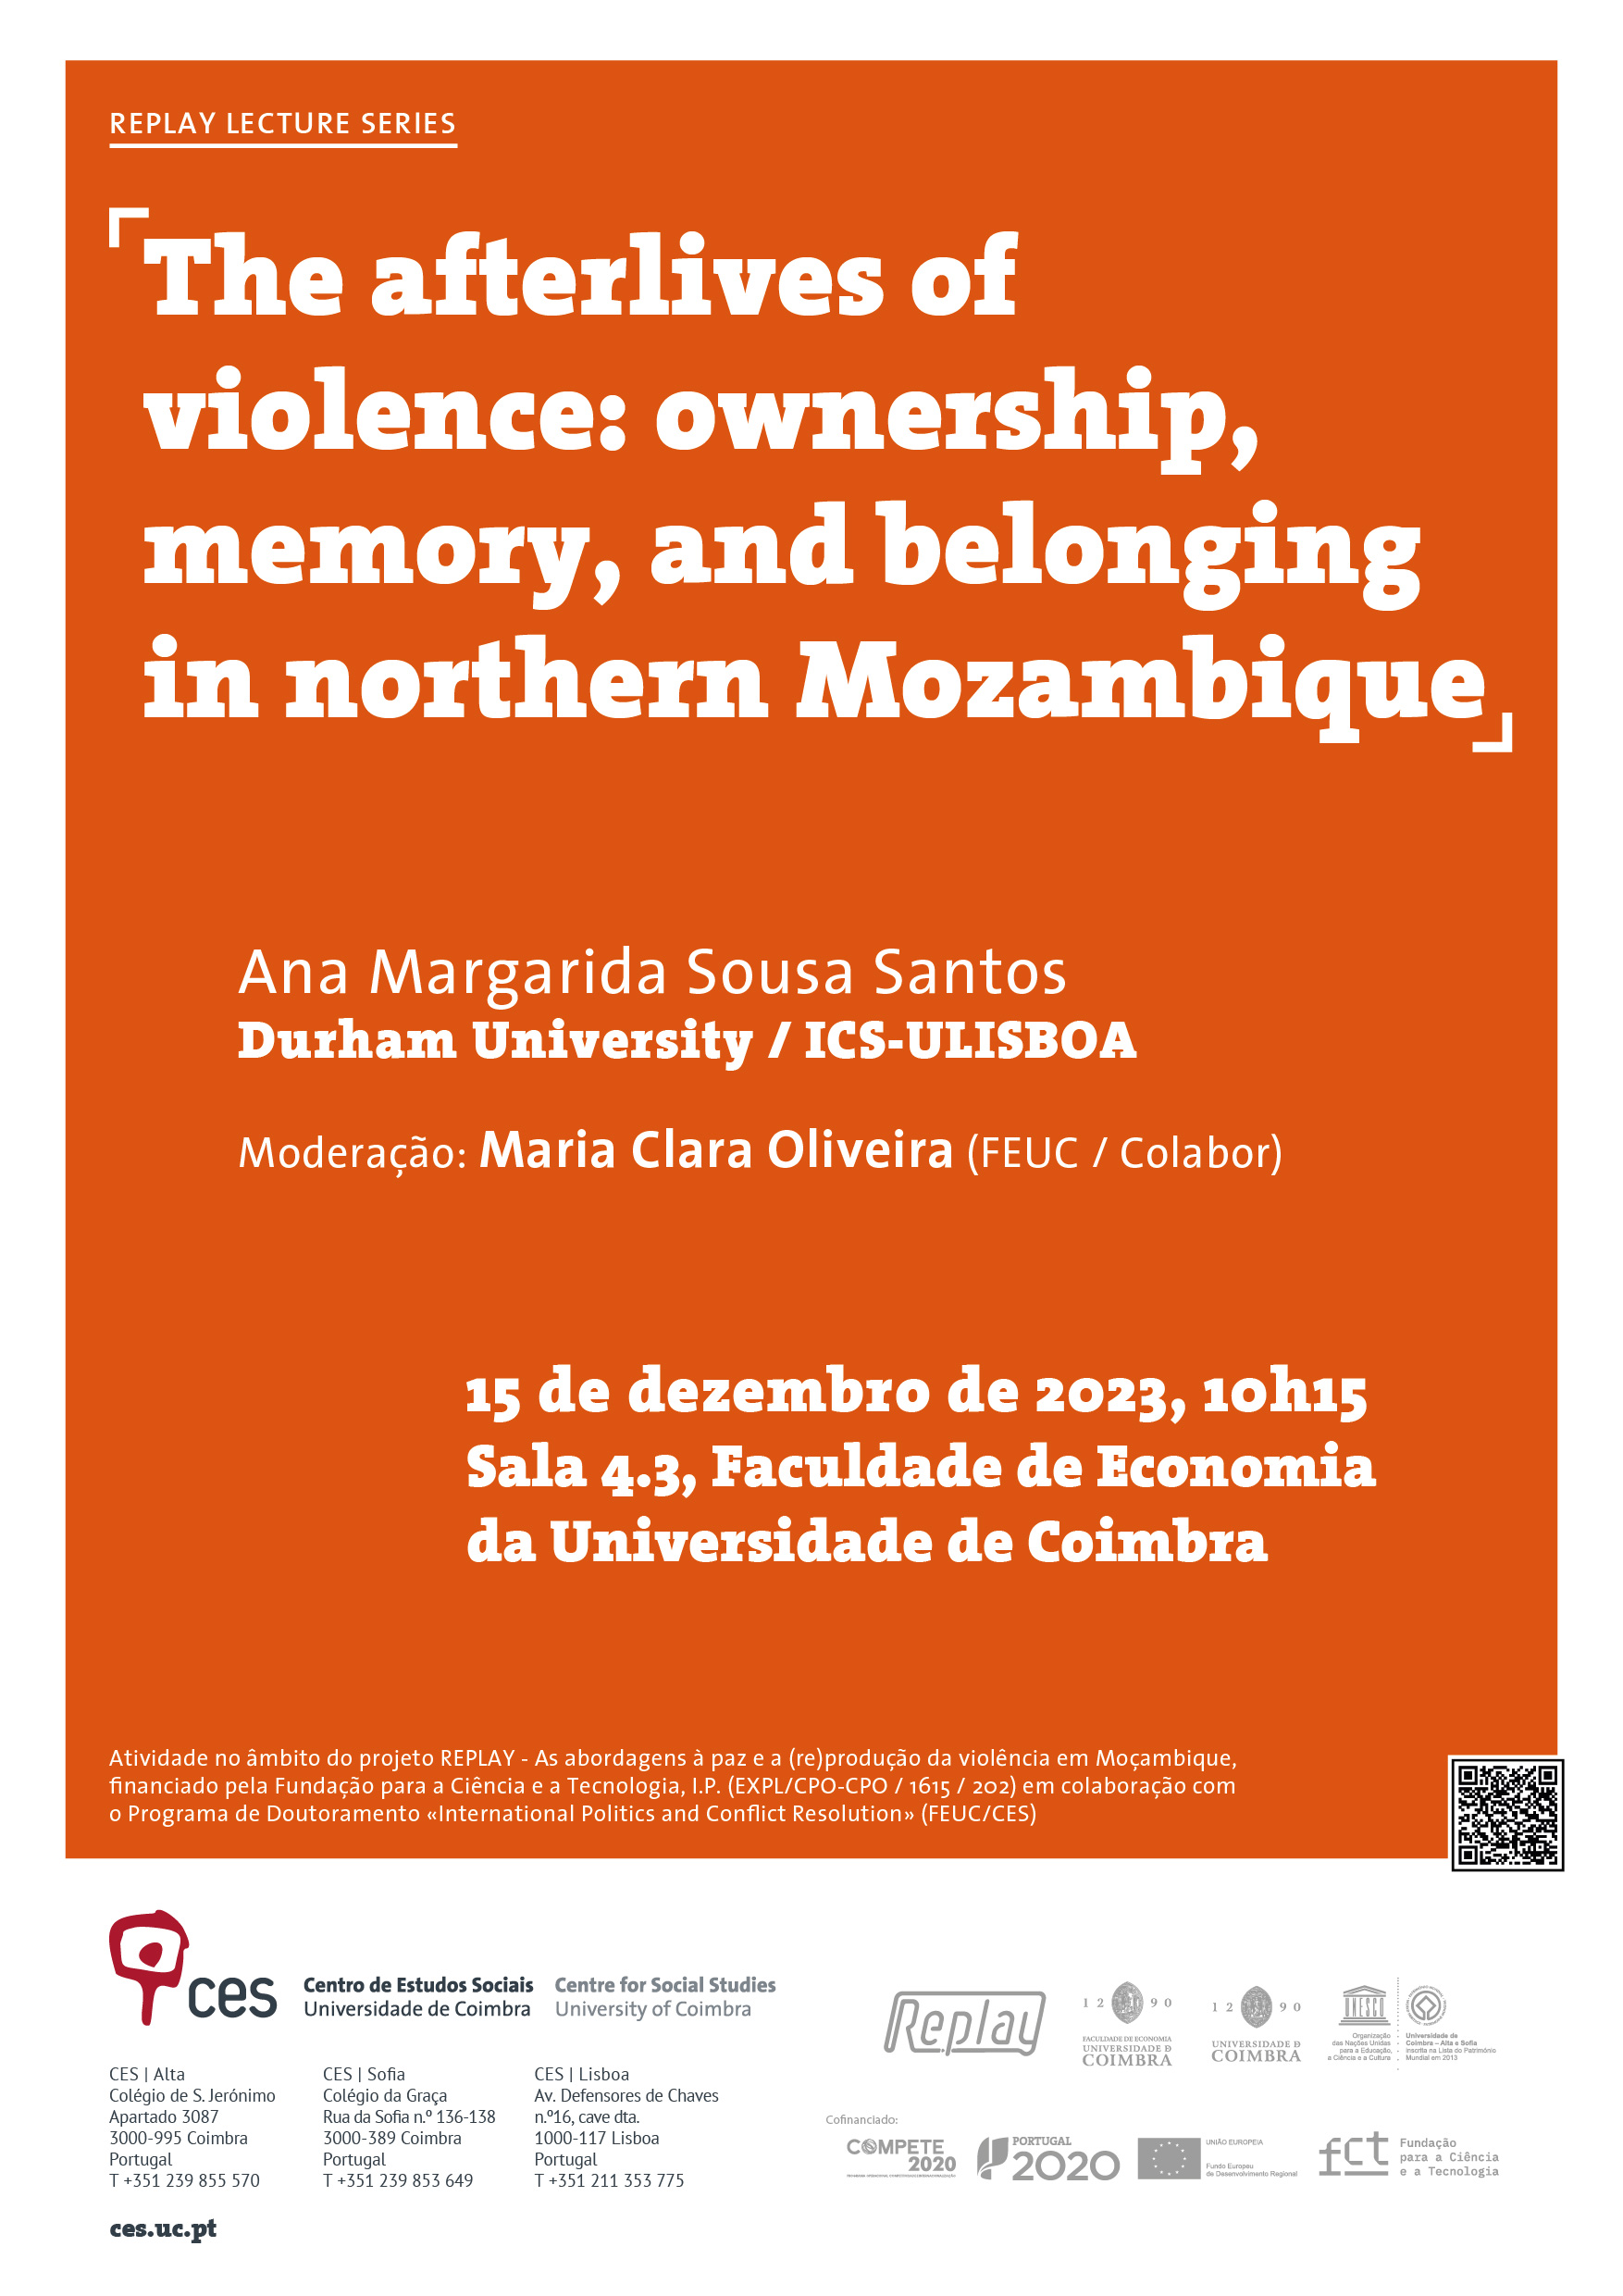 The afterlives of violence: ownership, memory, and belonging in northern Mozambique<span id="edit_44763"><script>$(function() { $('#edit_44763').load( "/myces/user/editobj.php?tipo=evento&id=44763" ); });</script></span>